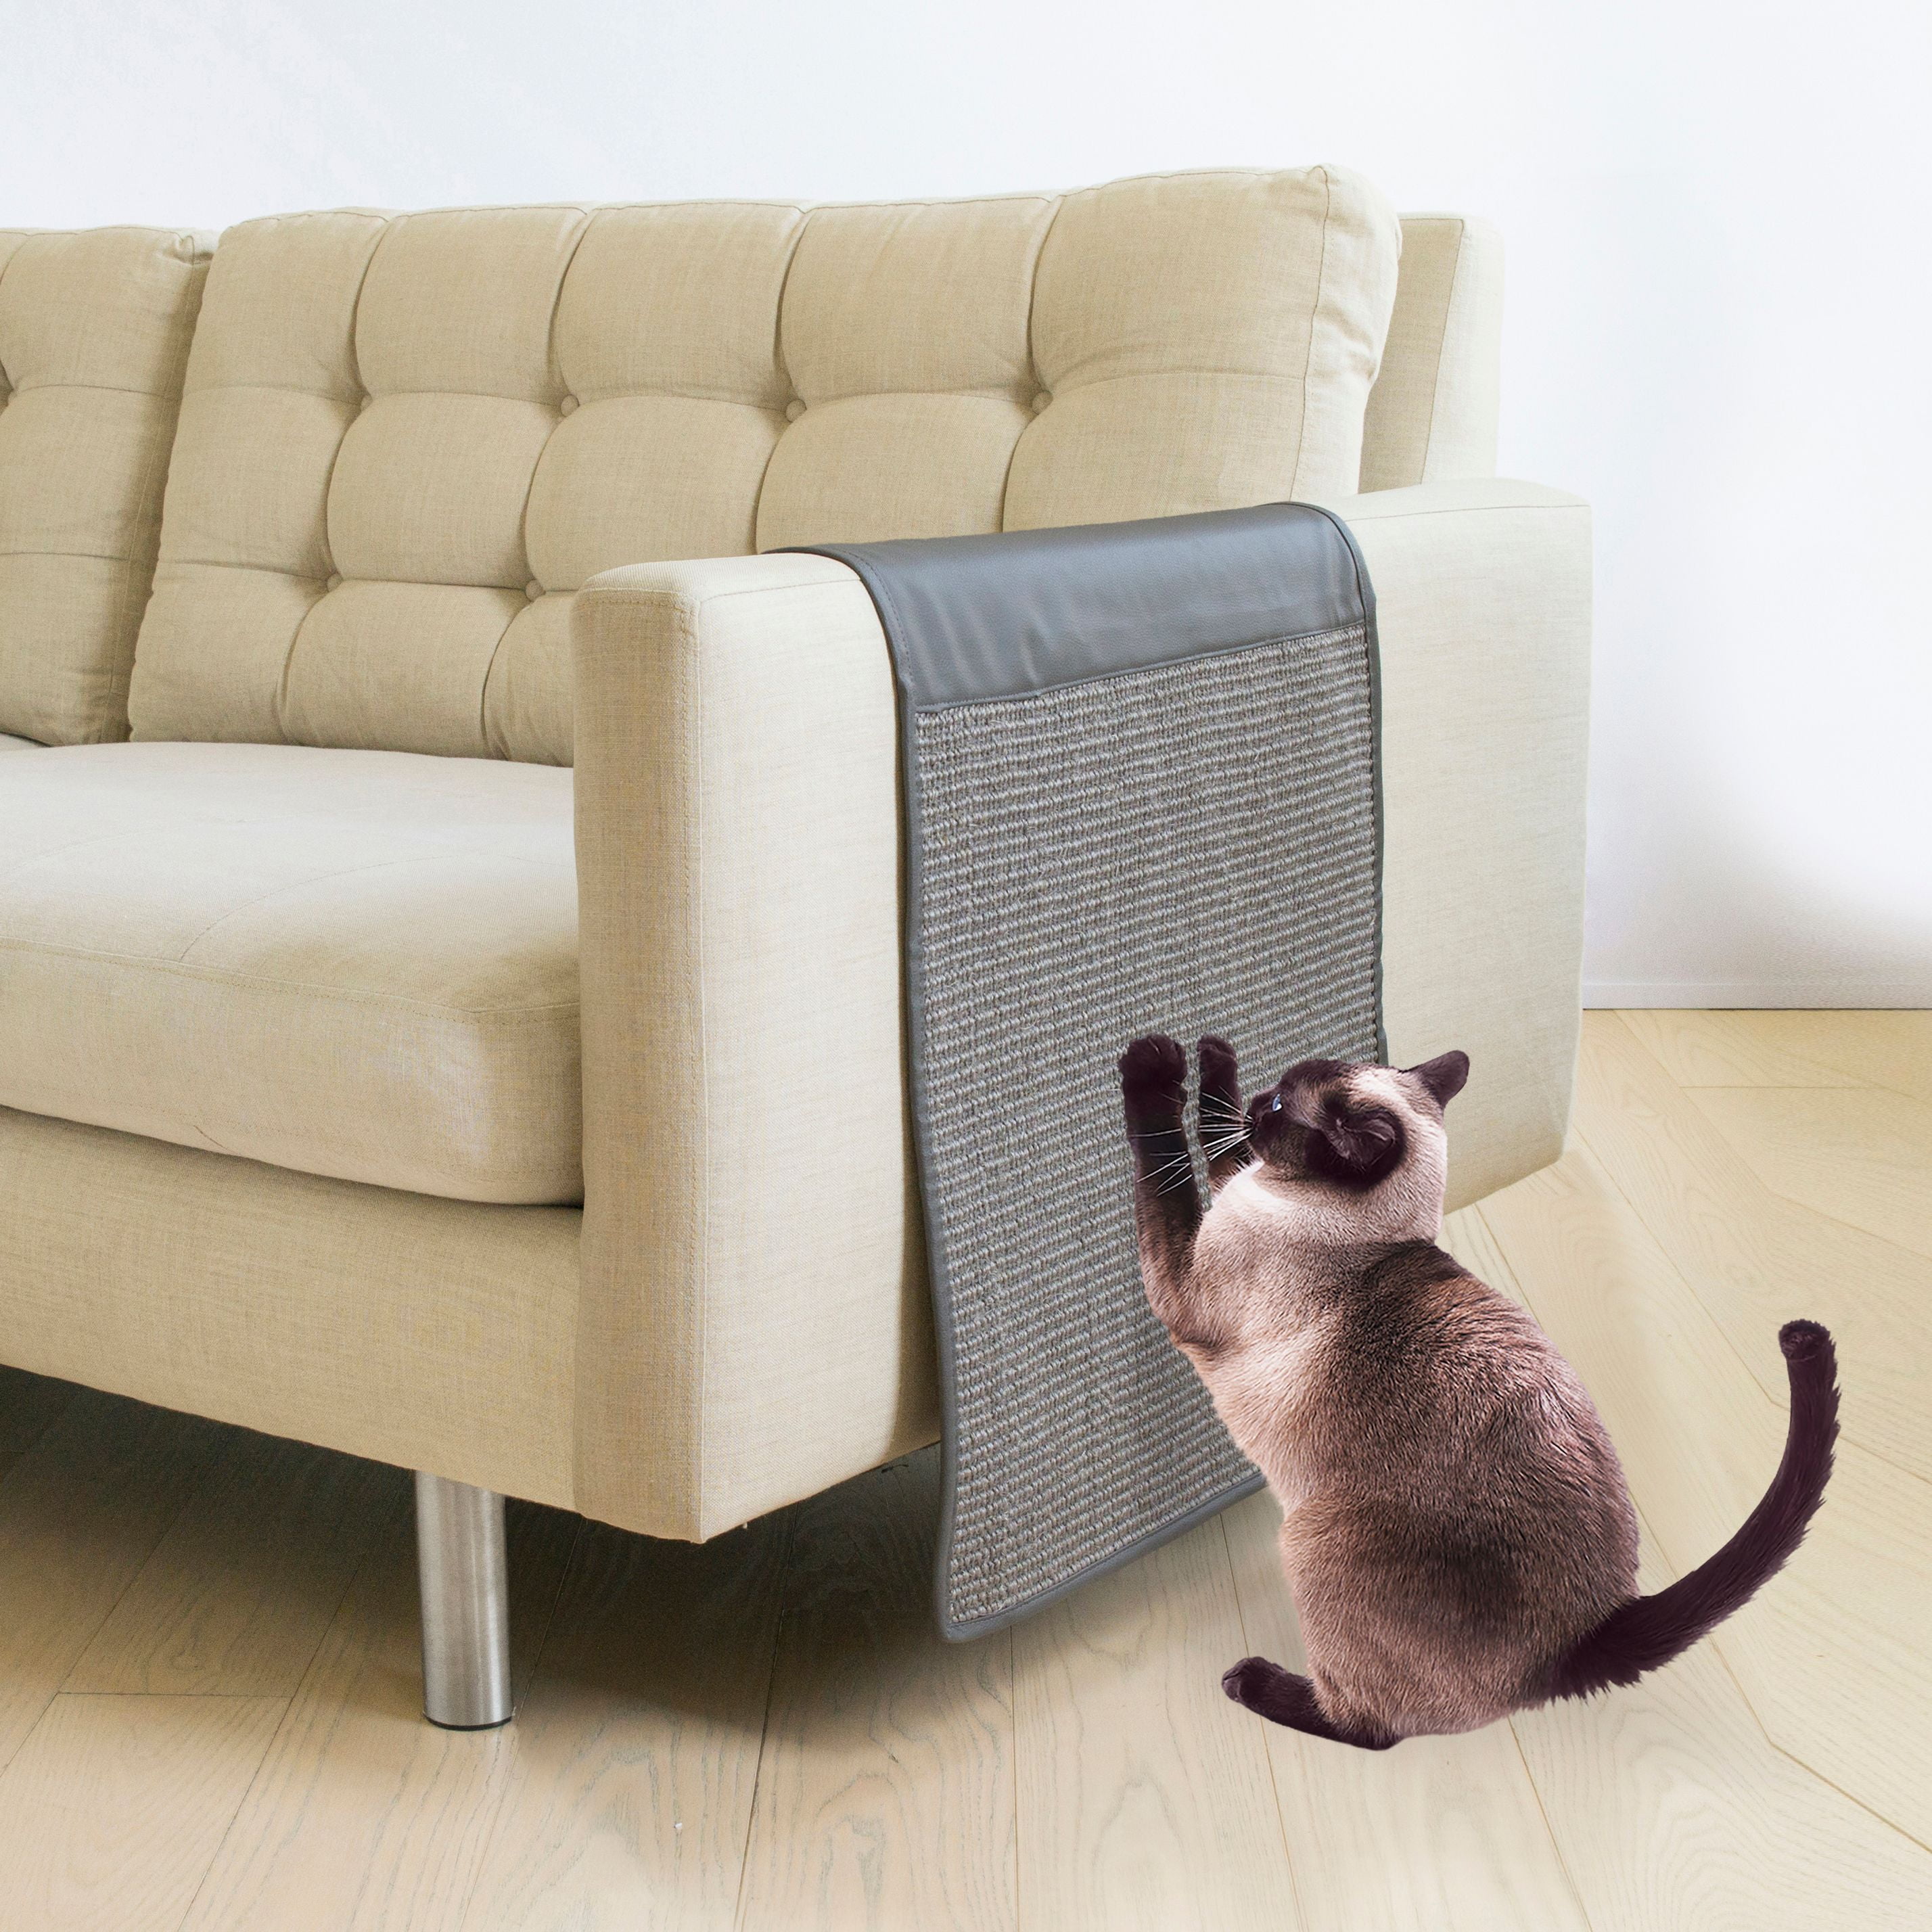 Precious Tails Cat Scratching Sofa, Is Leather Furniture Good With Cats